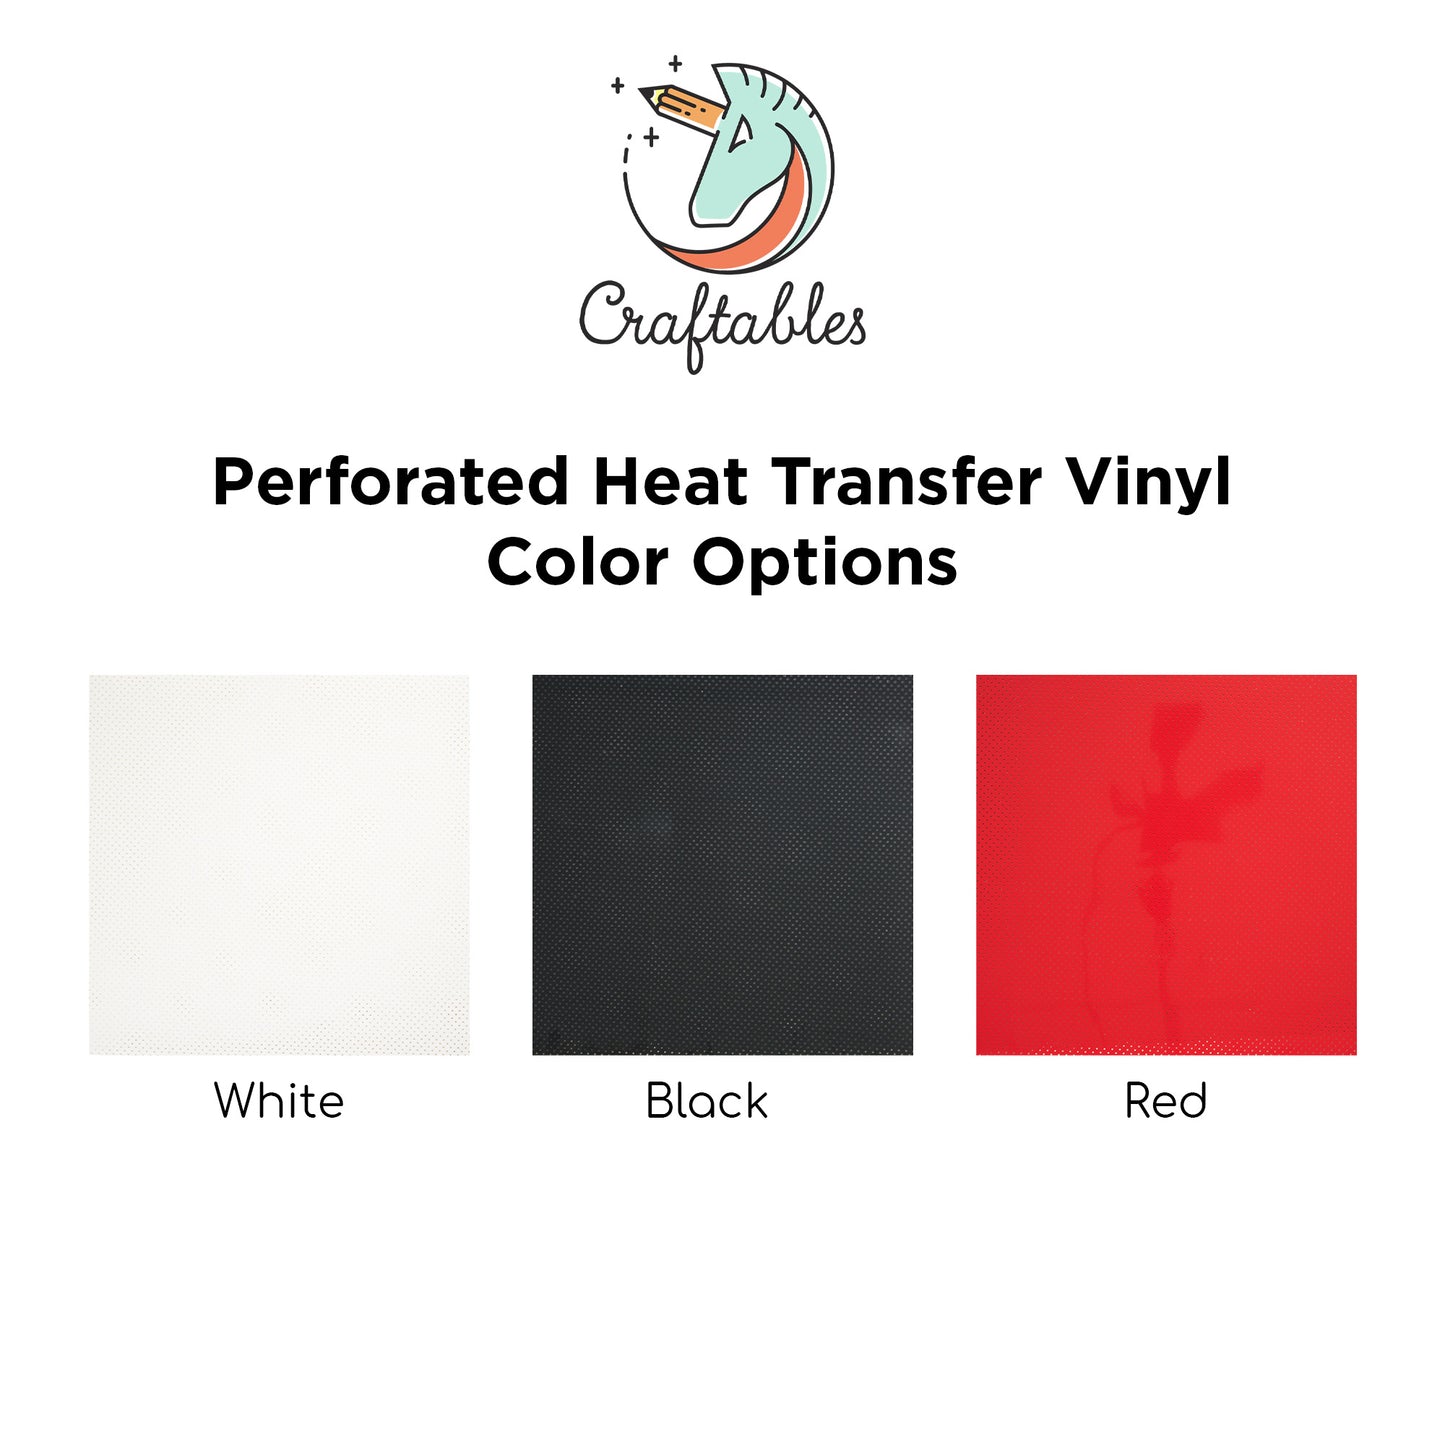 White Perforated Heat Transfer Vinyl Rolls By Craftables